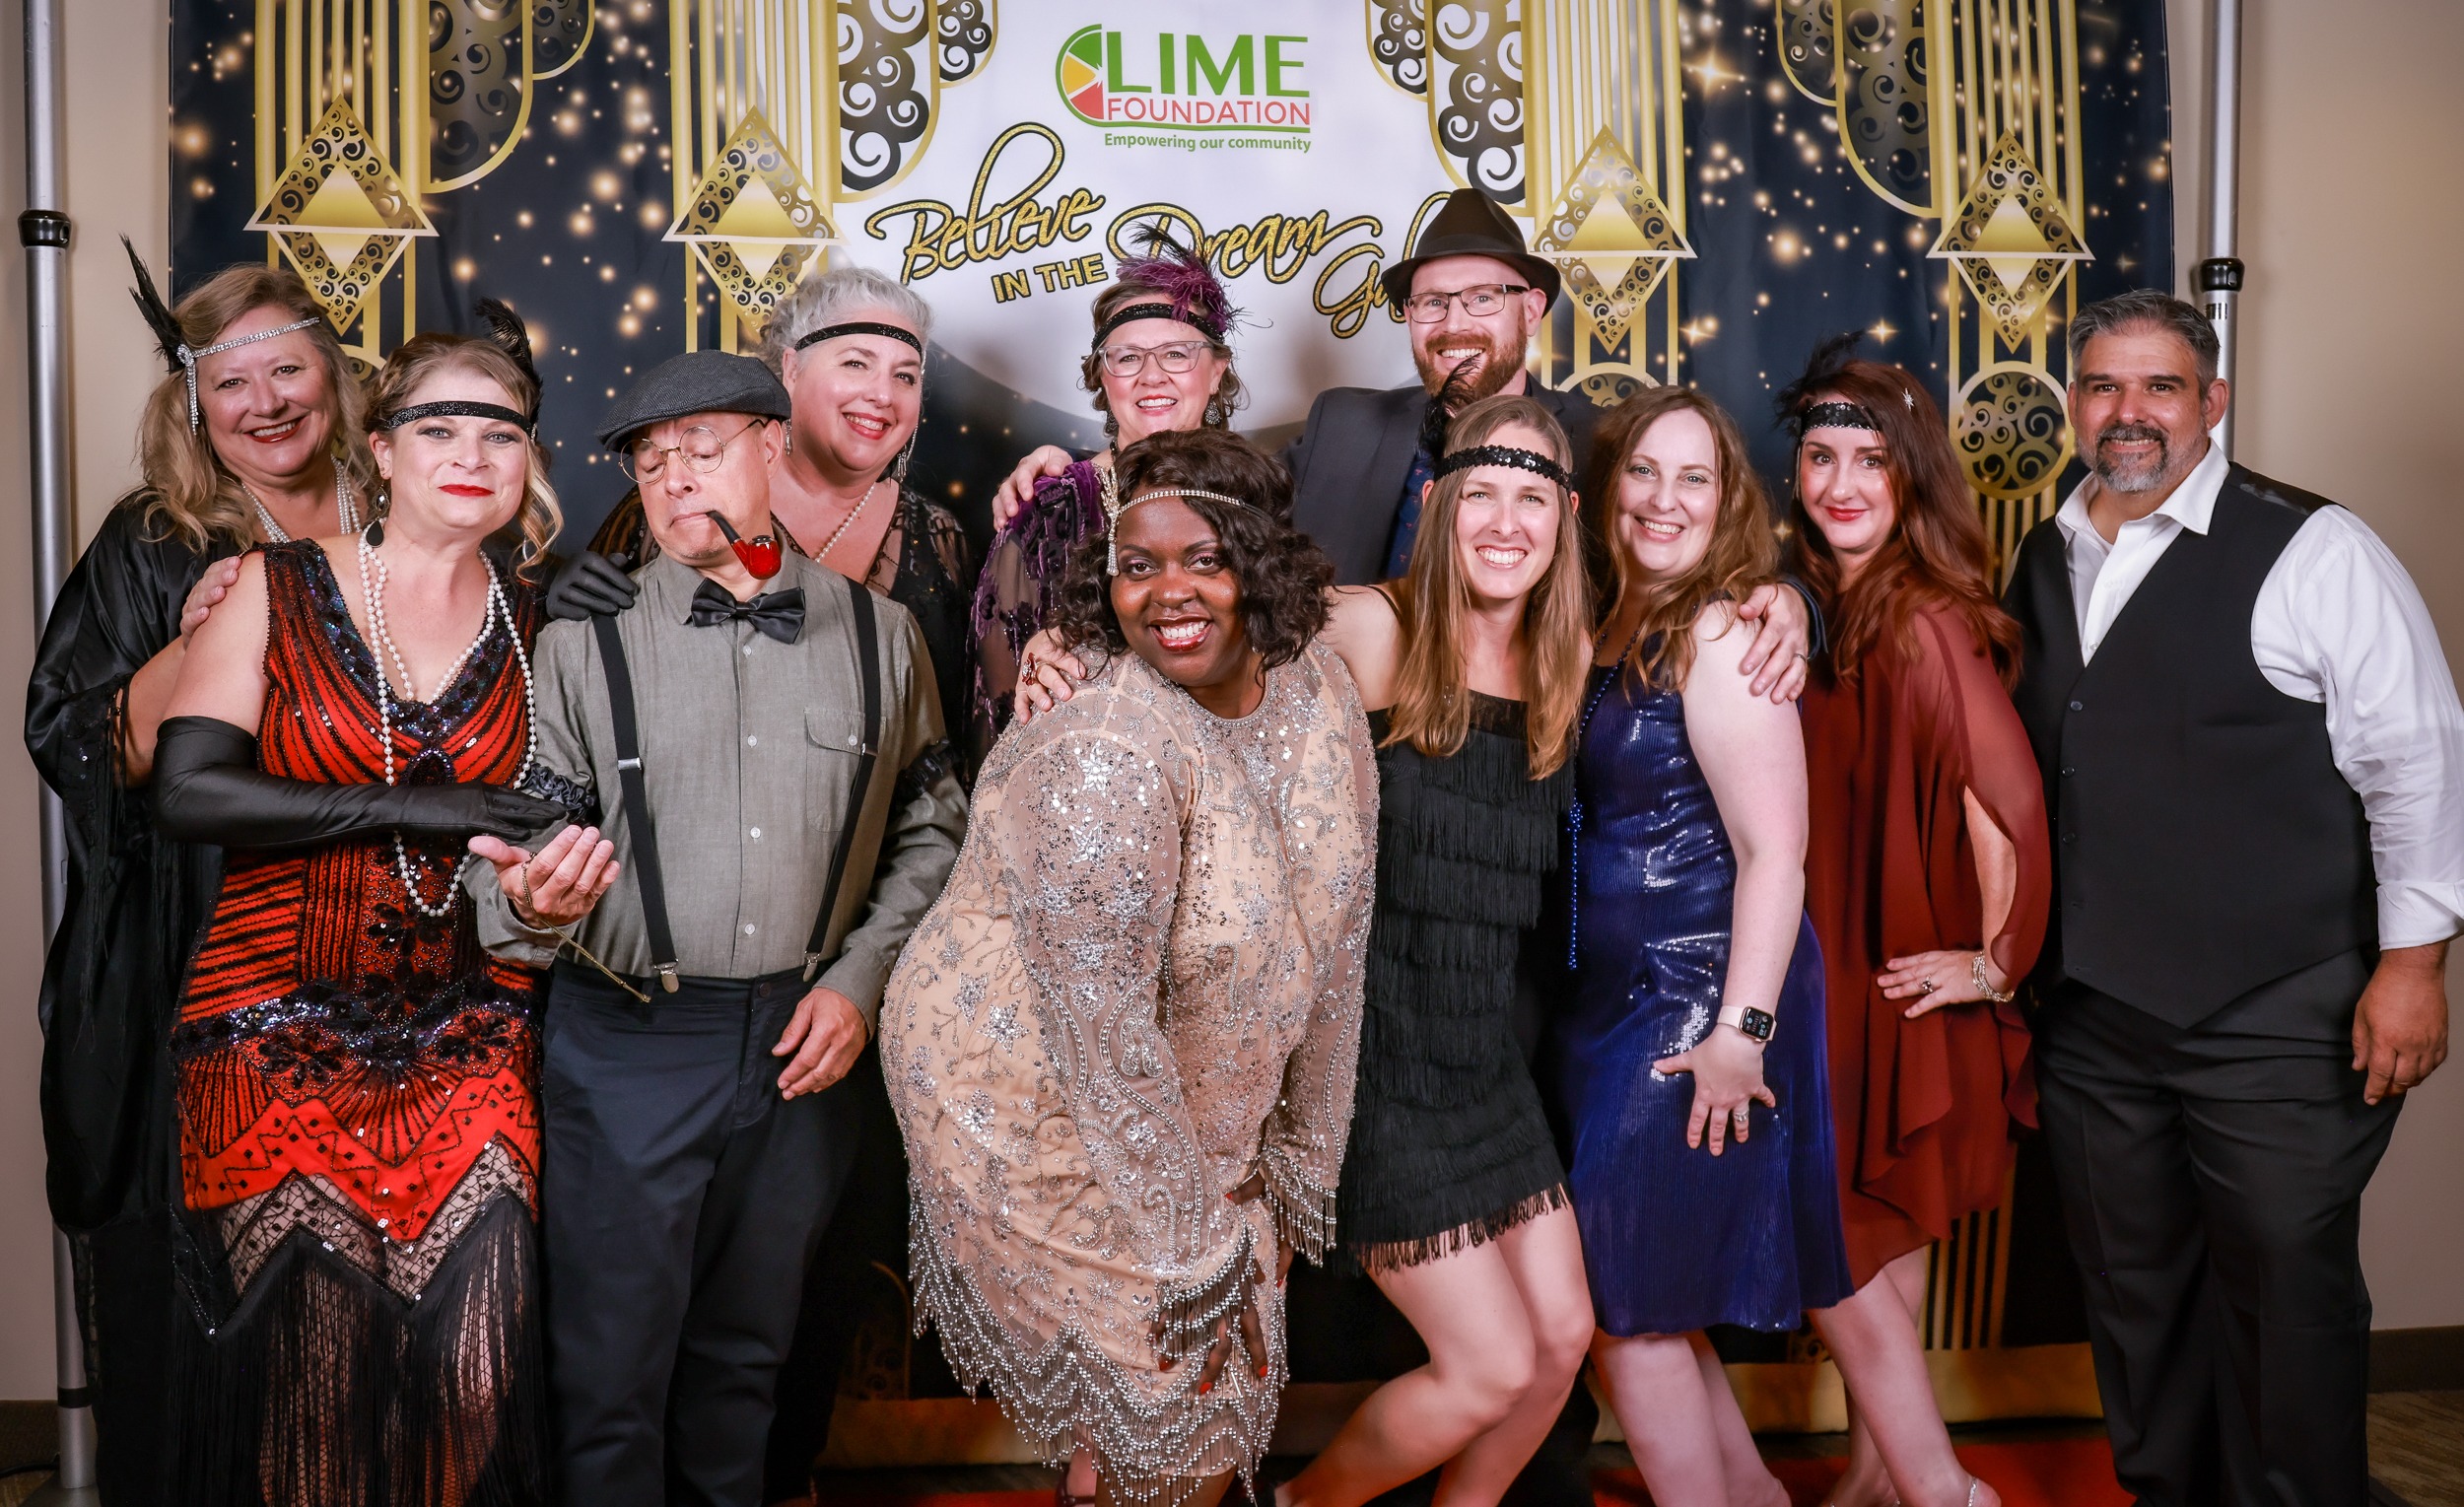 A group of people from The LIME Foundation posing for a photo on a red carpet in Santa Rosa.